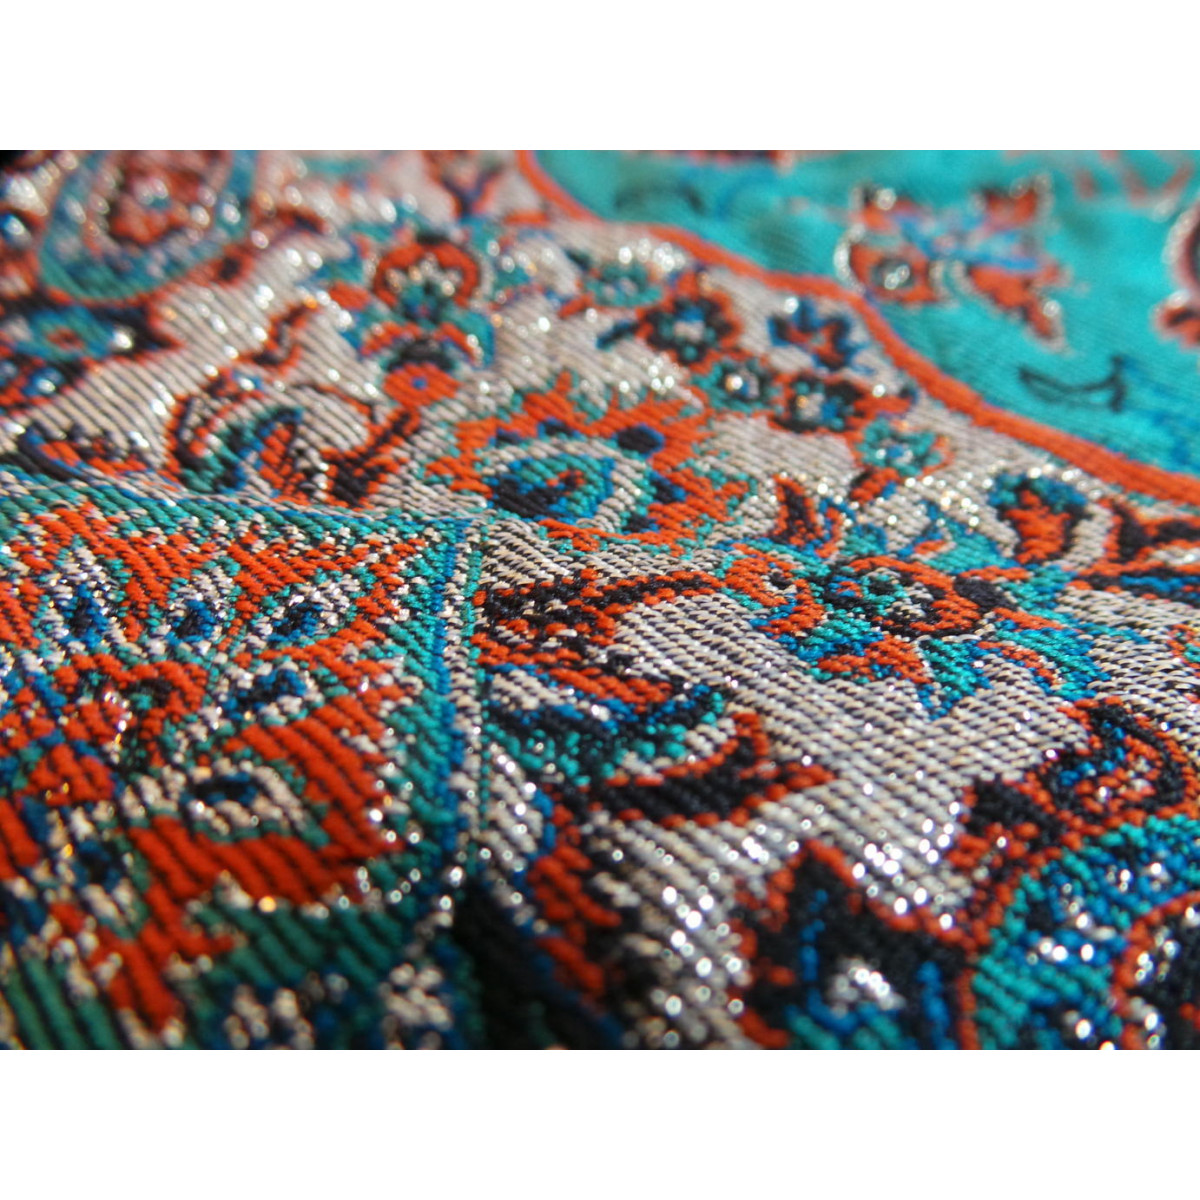 Termeh Luxury Tablecloth/Cushion Cover - HT3002-Persian Handicrafts